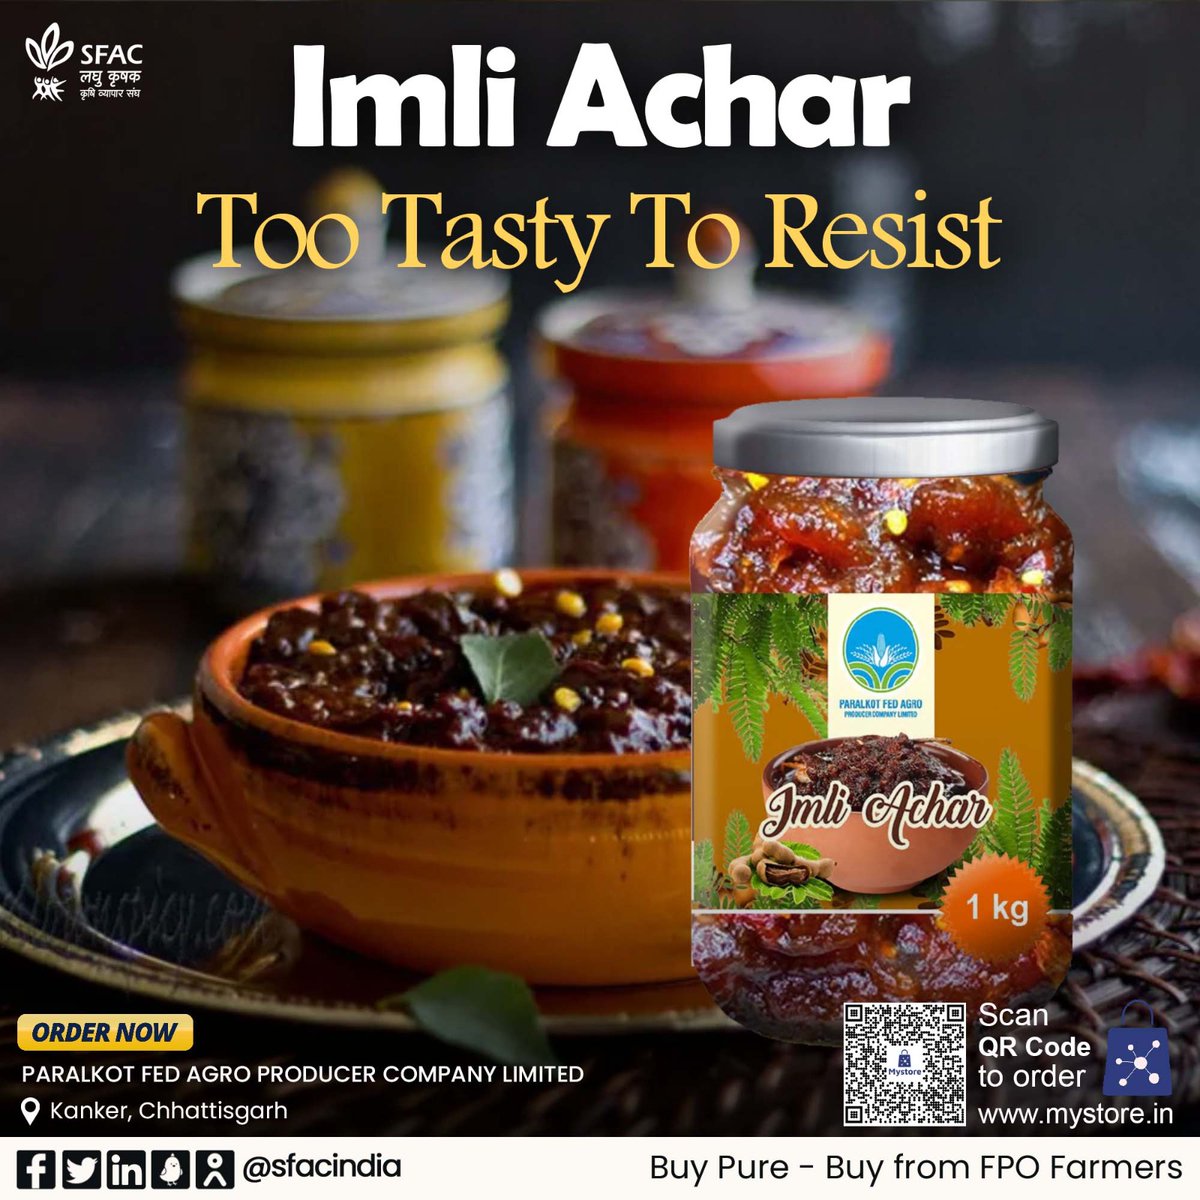 Made from premium-quality tamarind pulp, this traditional Indian pickle is a perfect blend of sweet, tangy, & spicy flavours. Buy straight from FPO farmers at👇 mystore.in/en/product/iml… 😋 #VocalForLocal #healthyeating #healthyhabits #healthychoices #tastyrecipes #tastybreakfast